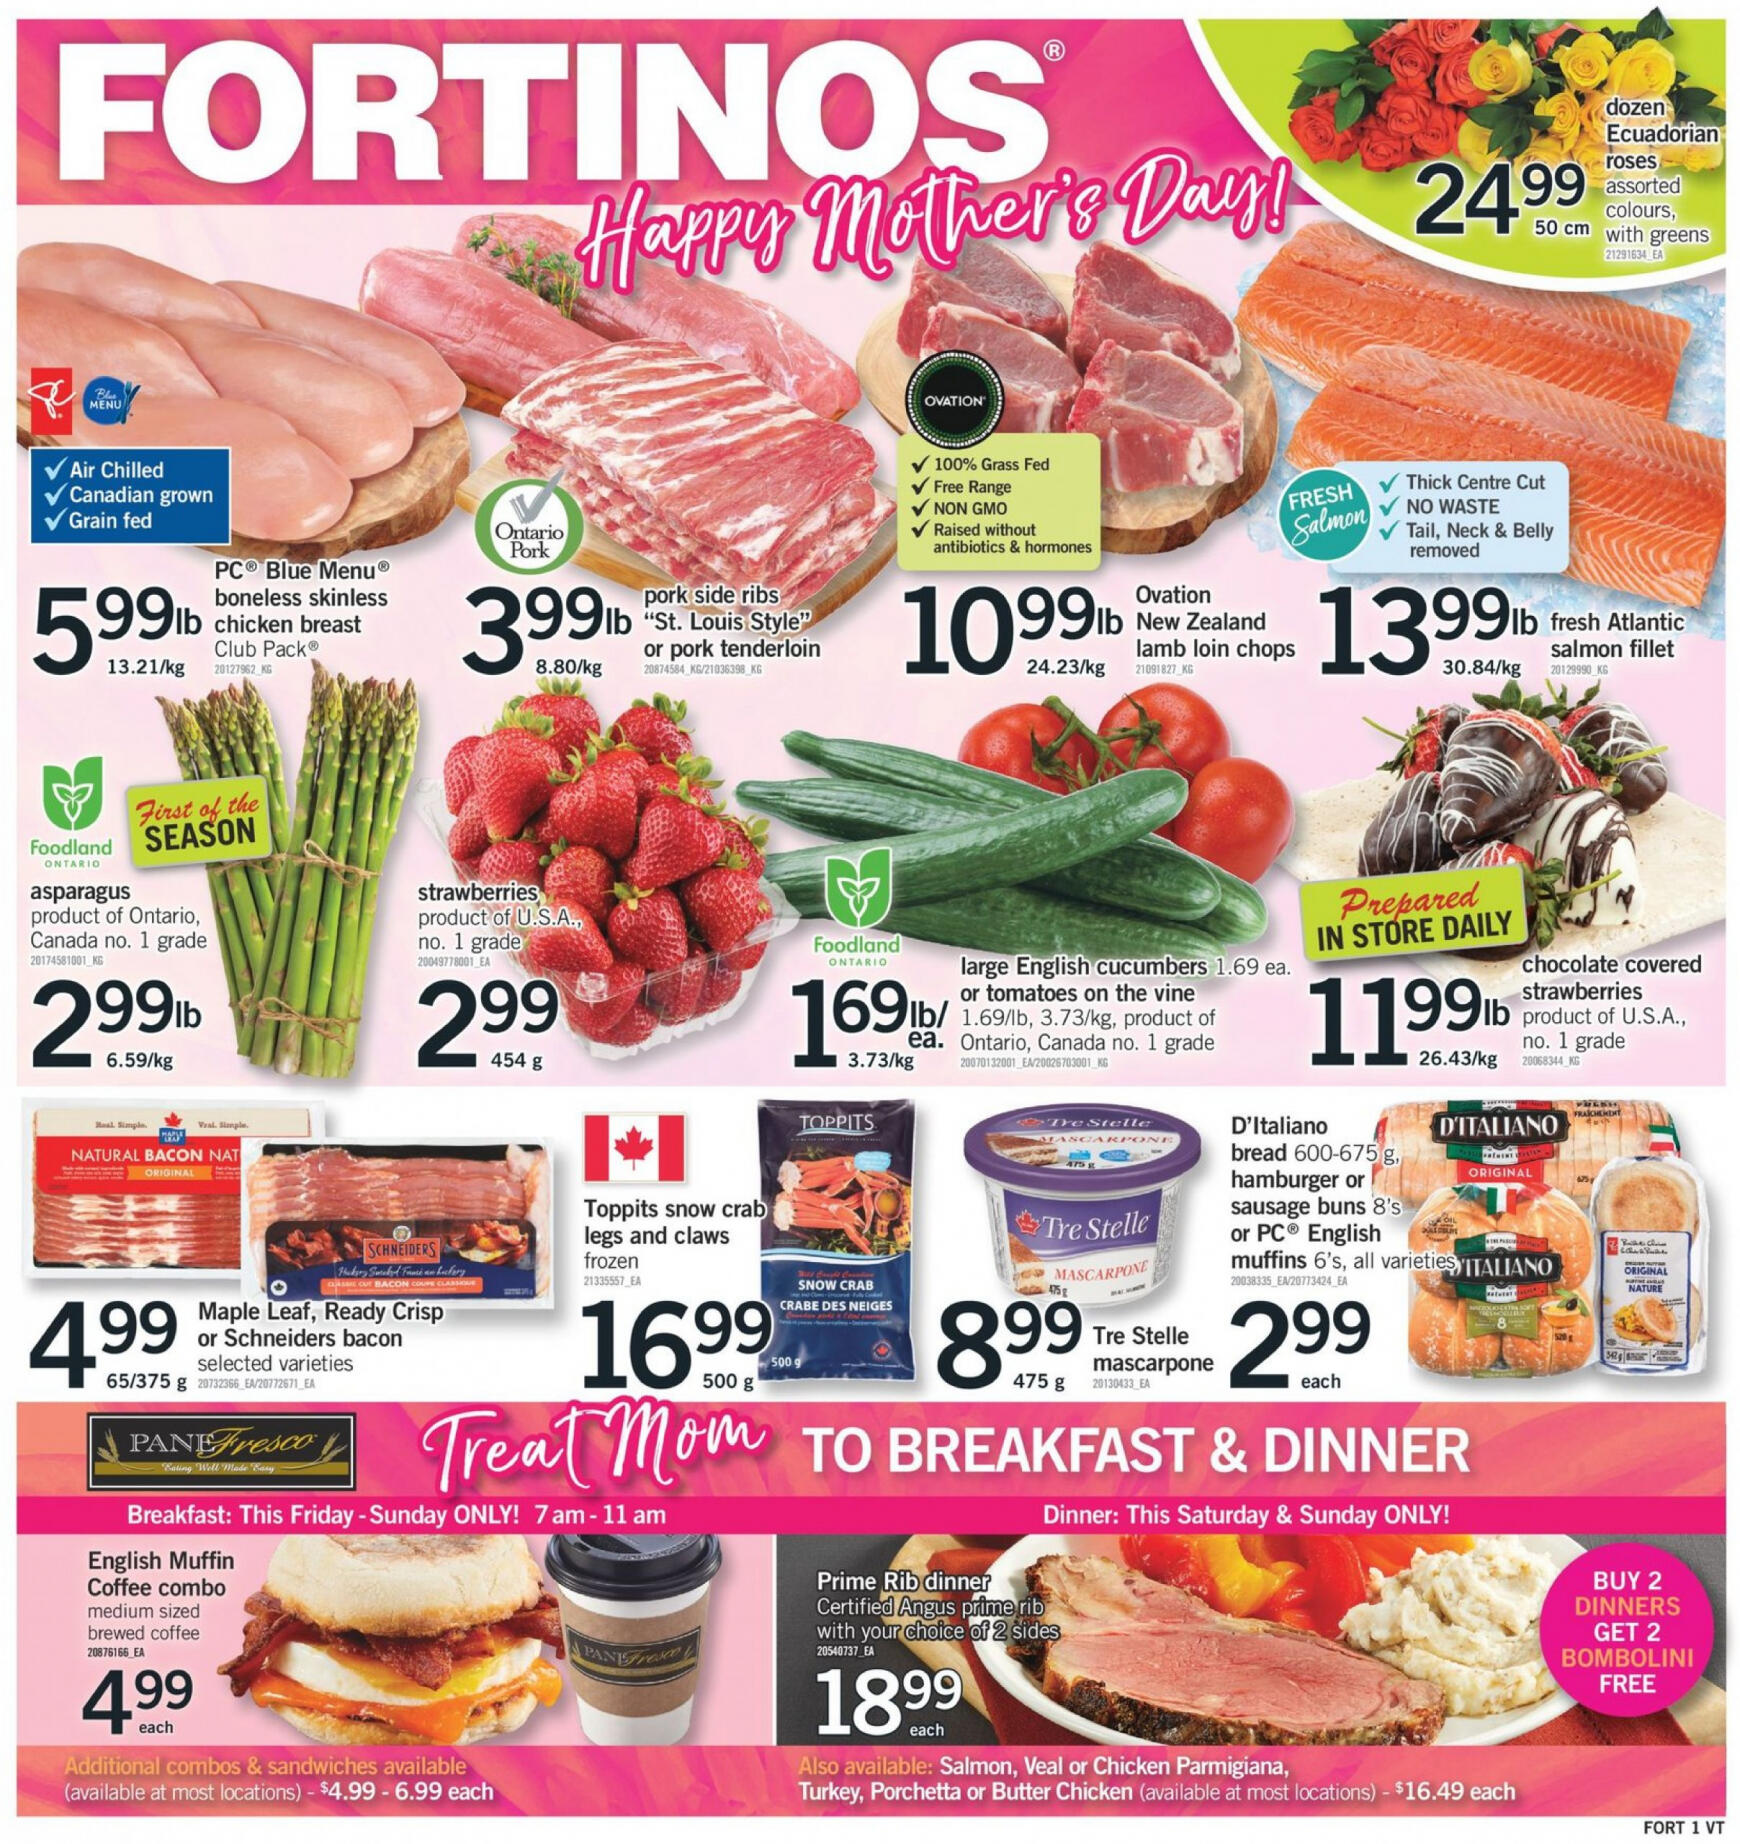 fortinos - Fortinos flyer current 09.05. - 15.05.